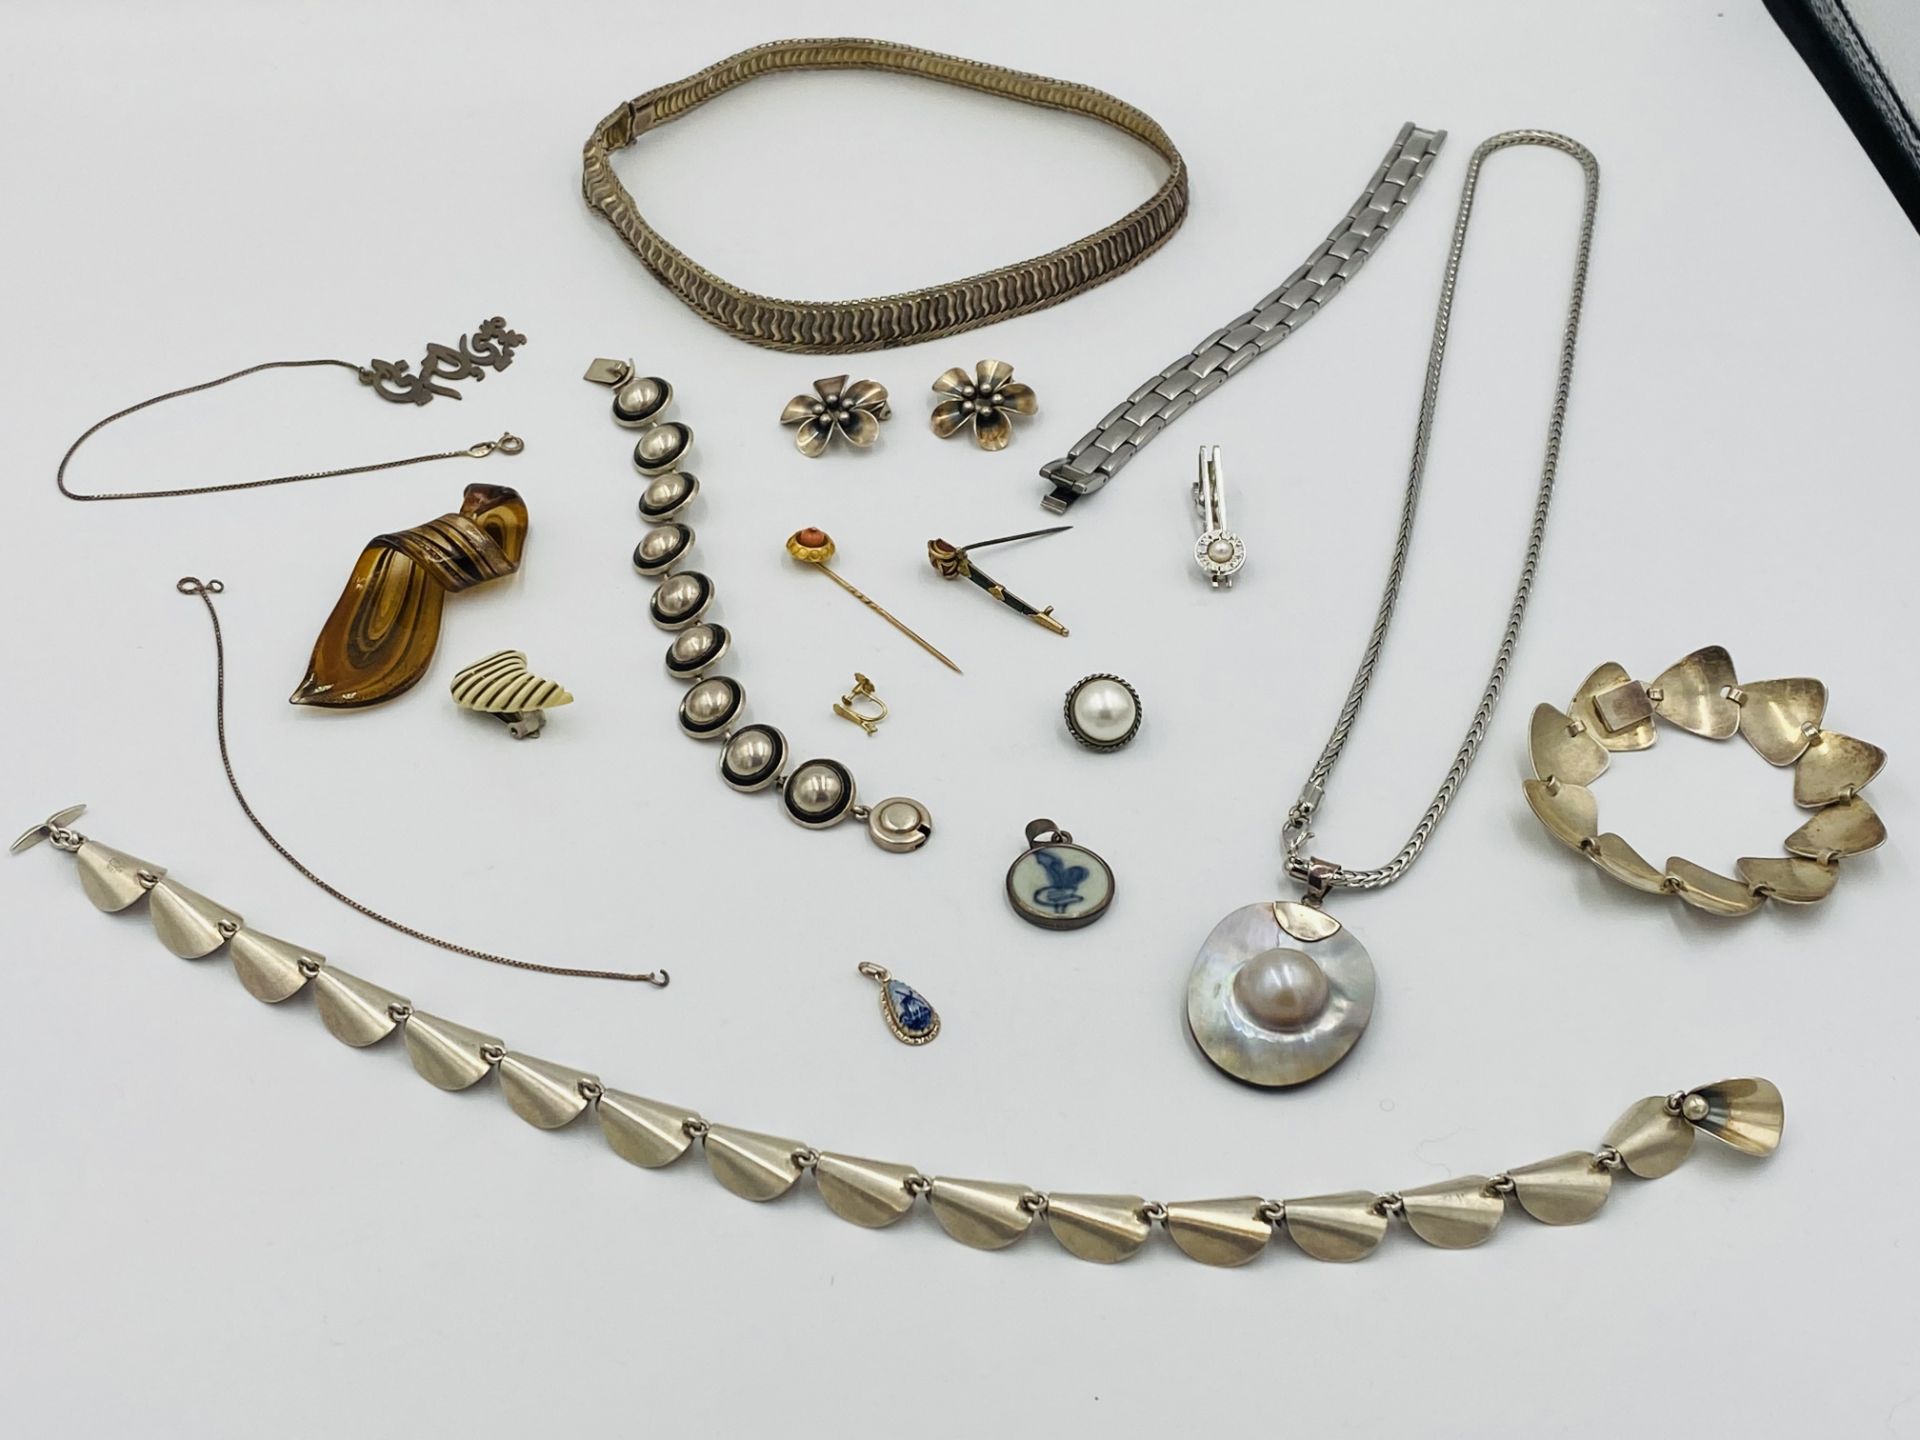 Quantity of N.E.From Danish silver jewellery and other items - Image 5 of 6